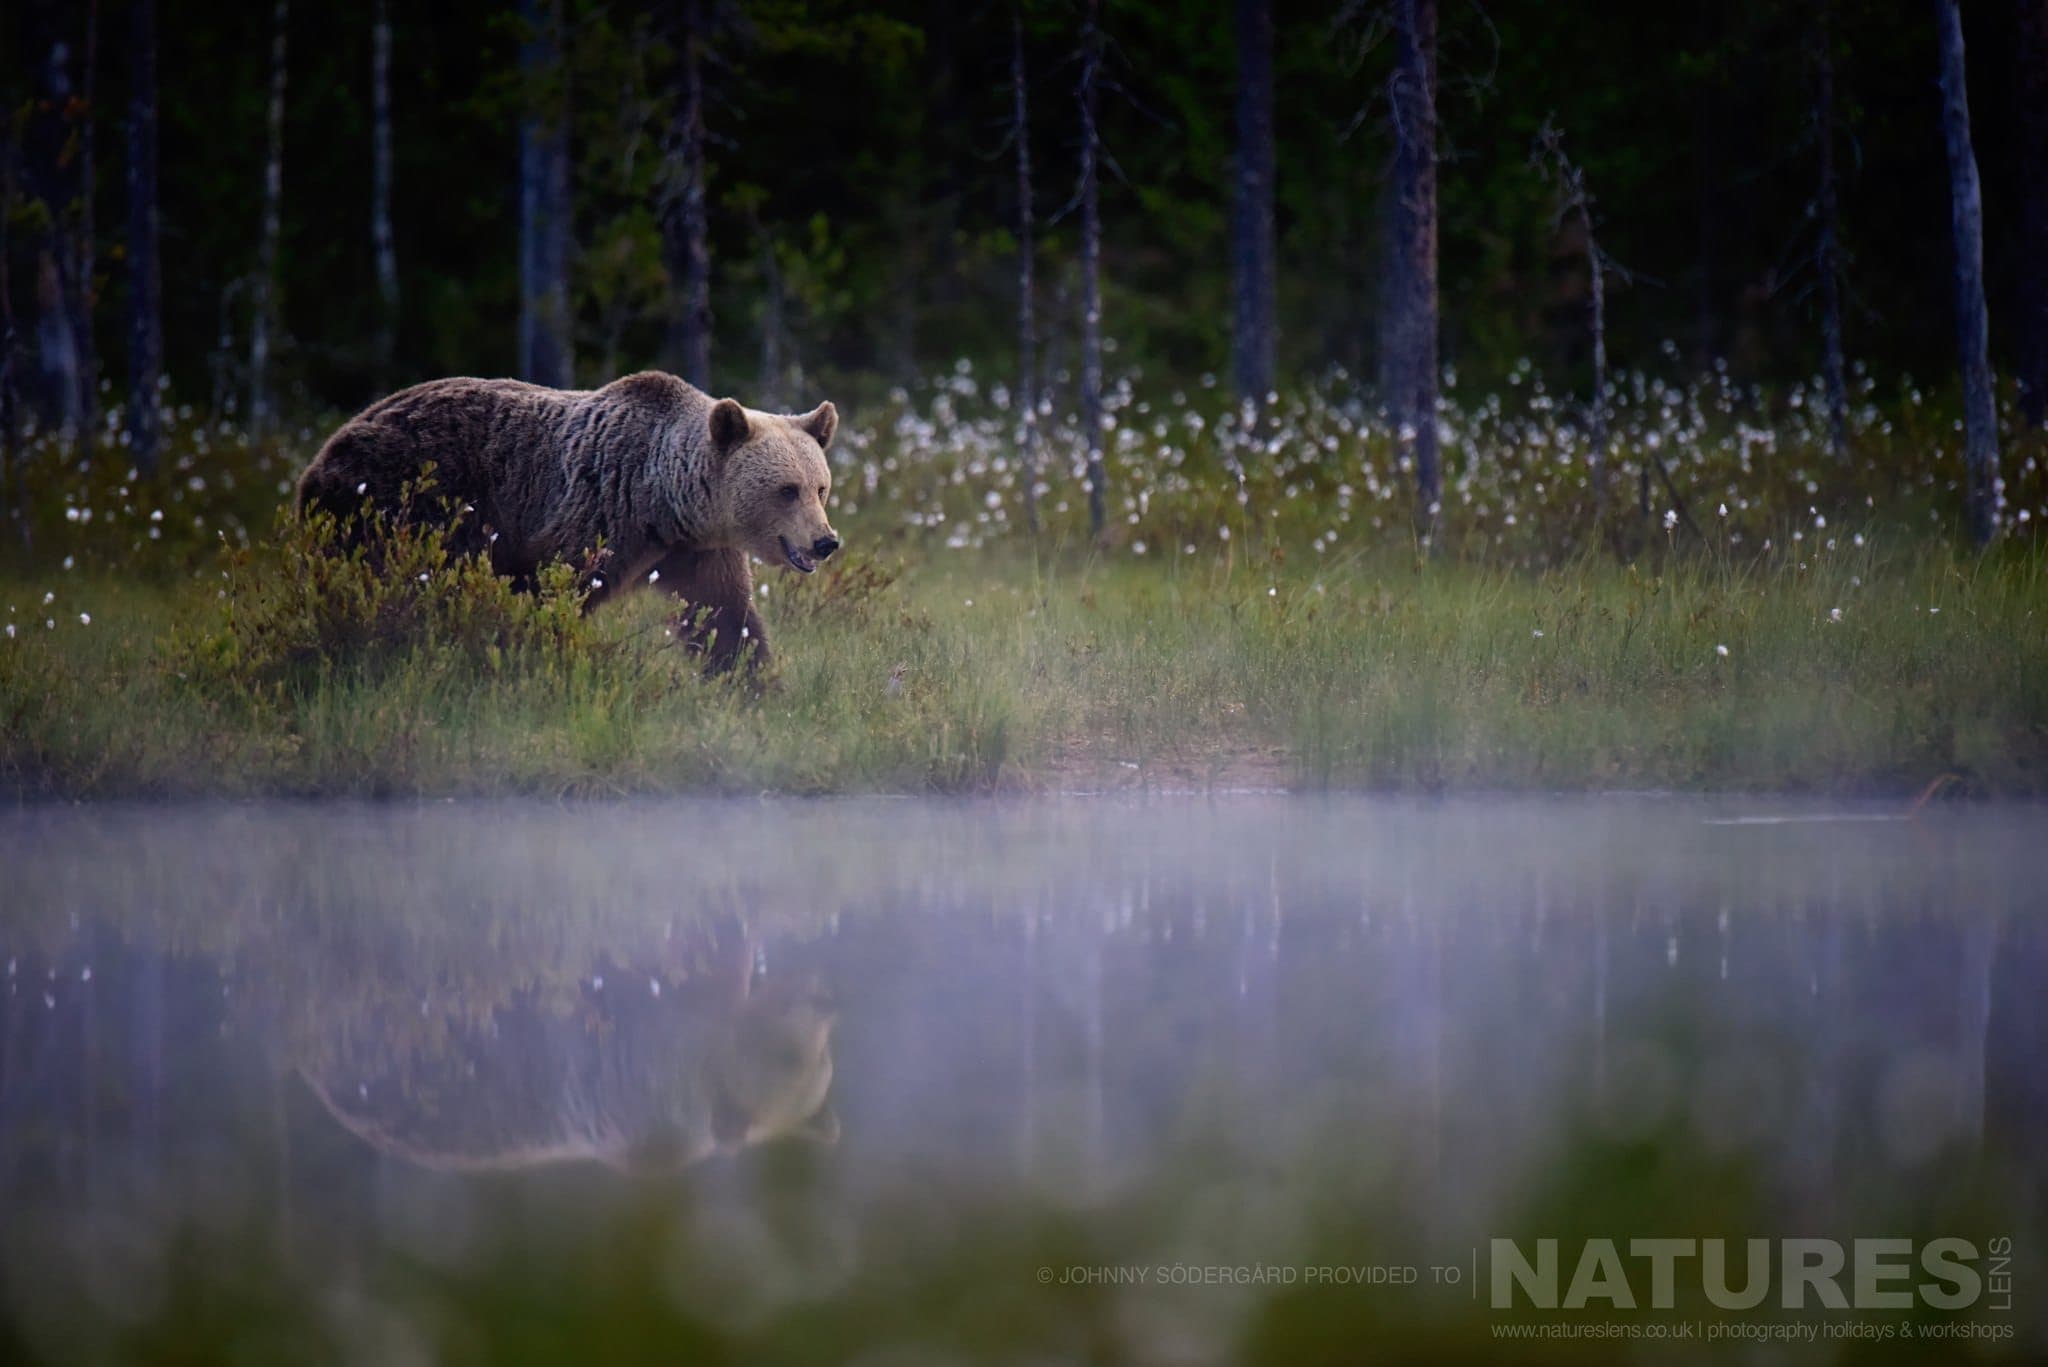 One Of The Large Bears Walks Alongside Is Reflected Within The Lake Photographed By Johnny Södergård During The Natureslens Wild Brown Bears Of Finland Photography Holiday